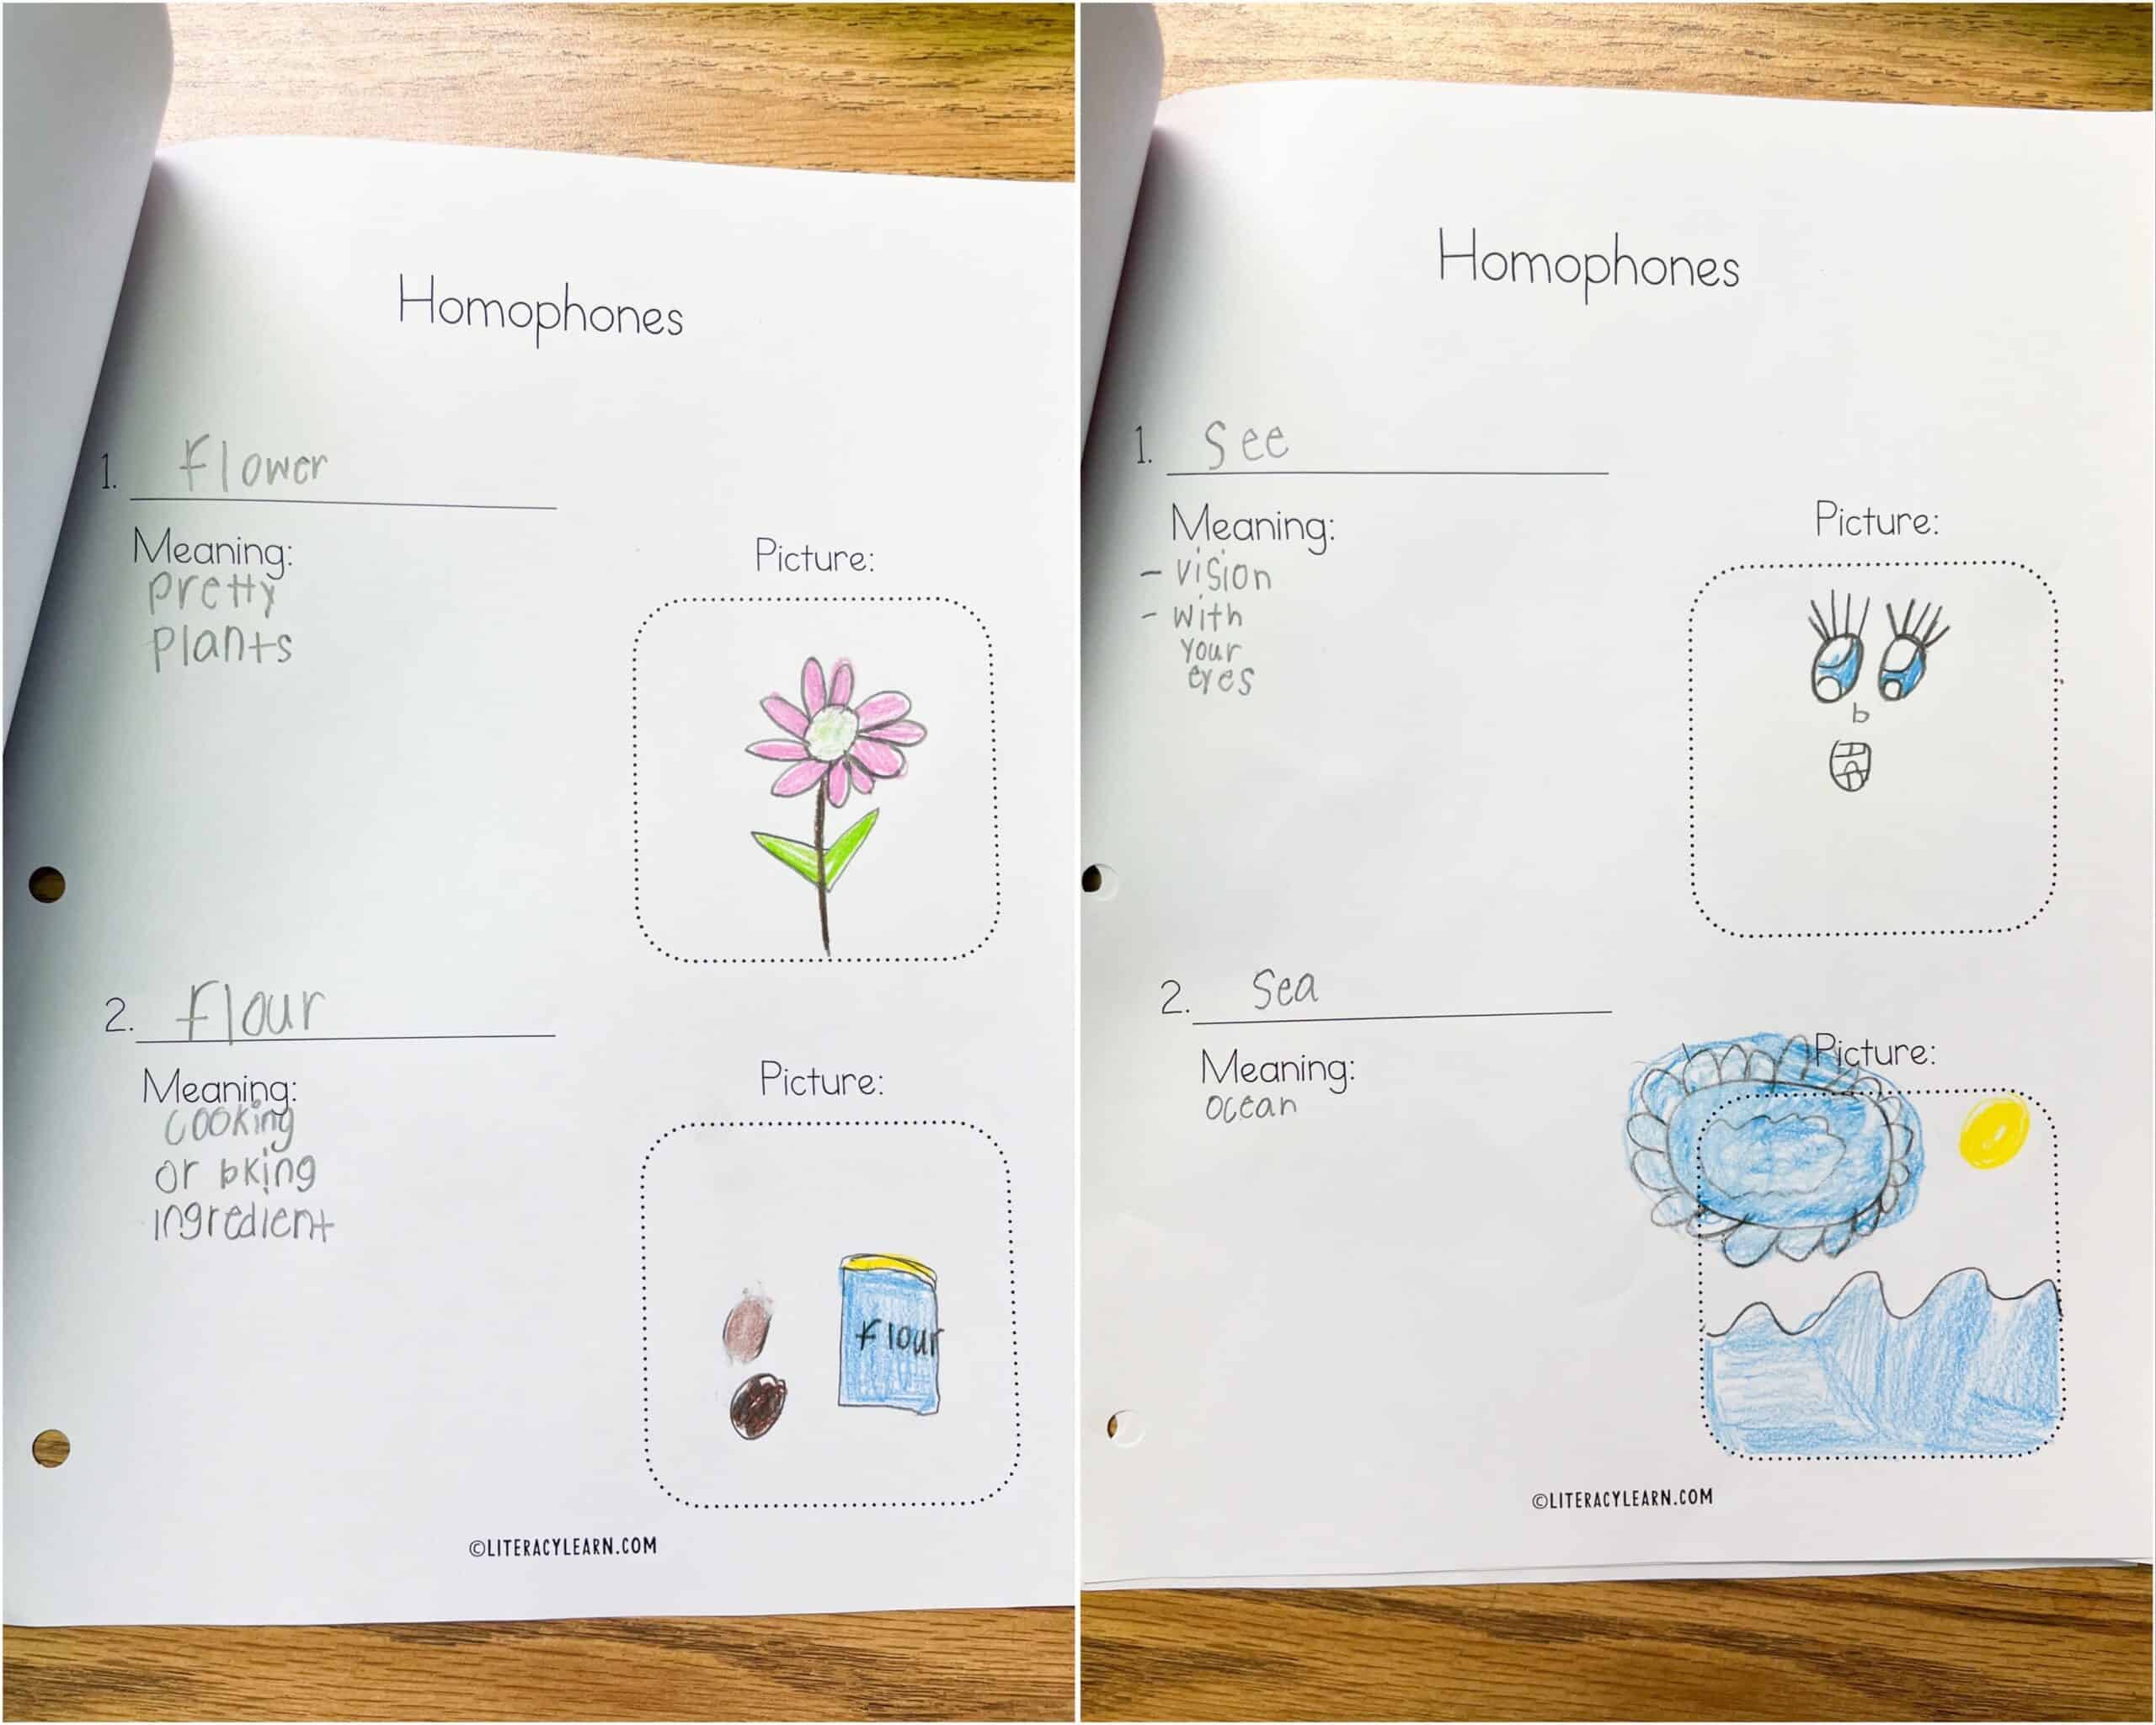 Two samples of student worksheets with homophone words, meanings, and picture.